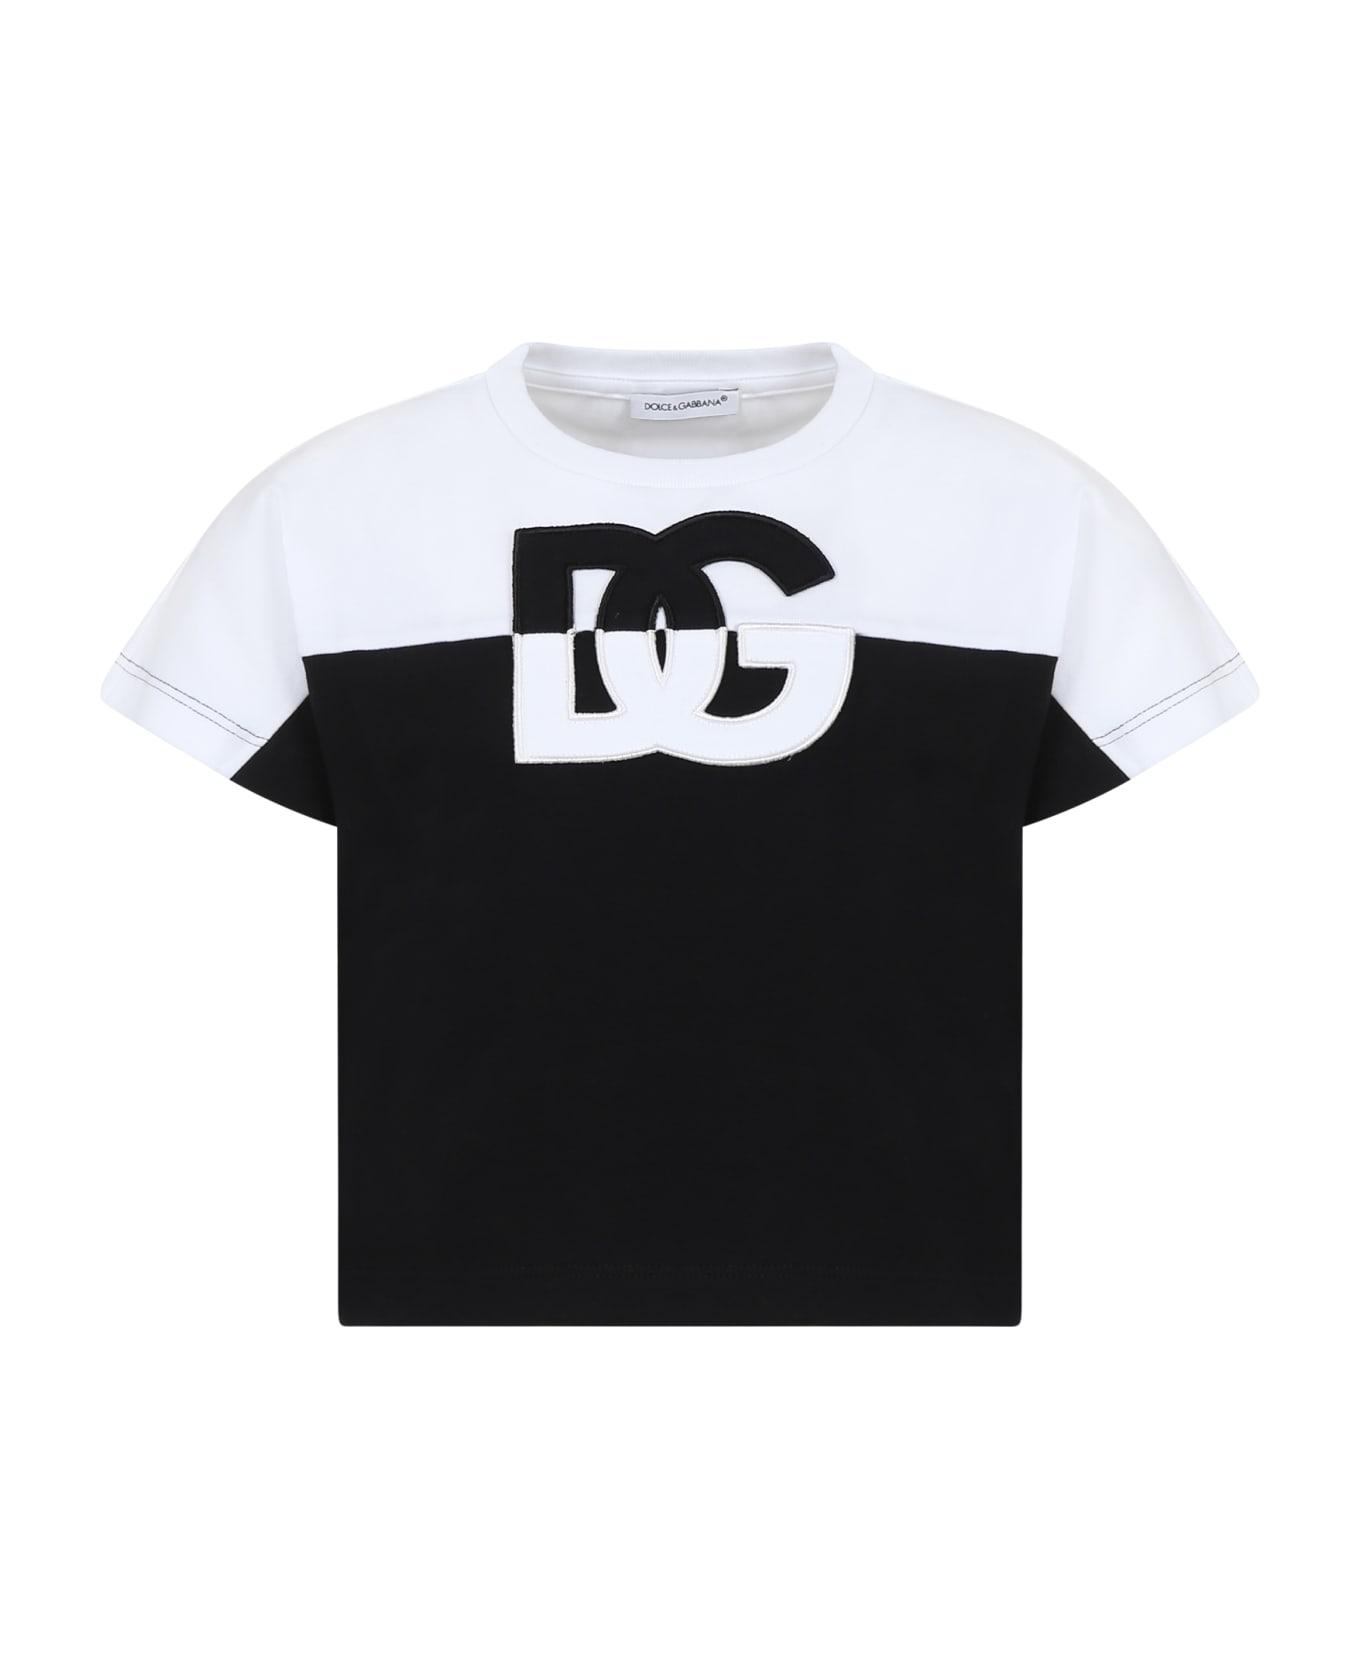 Dolce & Gabbana Black T-shirt For Girl With Iconic Monogram - Multicolor